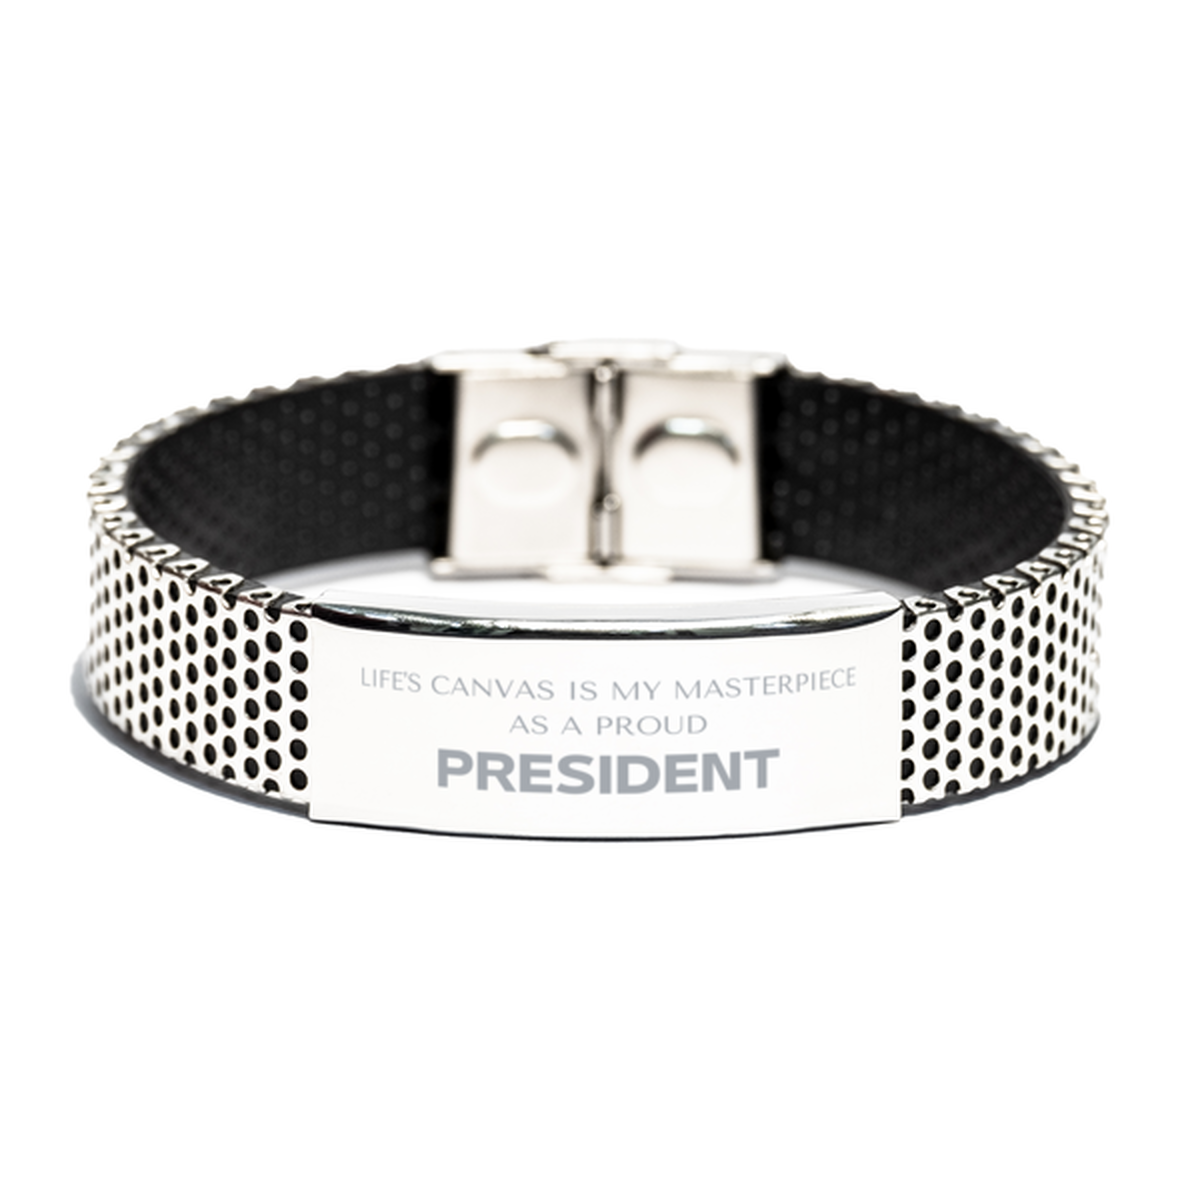 Proud President Gifts, Life's canvas is my masterpiece, Epic Birthday Christmas Unique Stainless Steel Bracelet For President, Coworkers, Men, Women, Friends